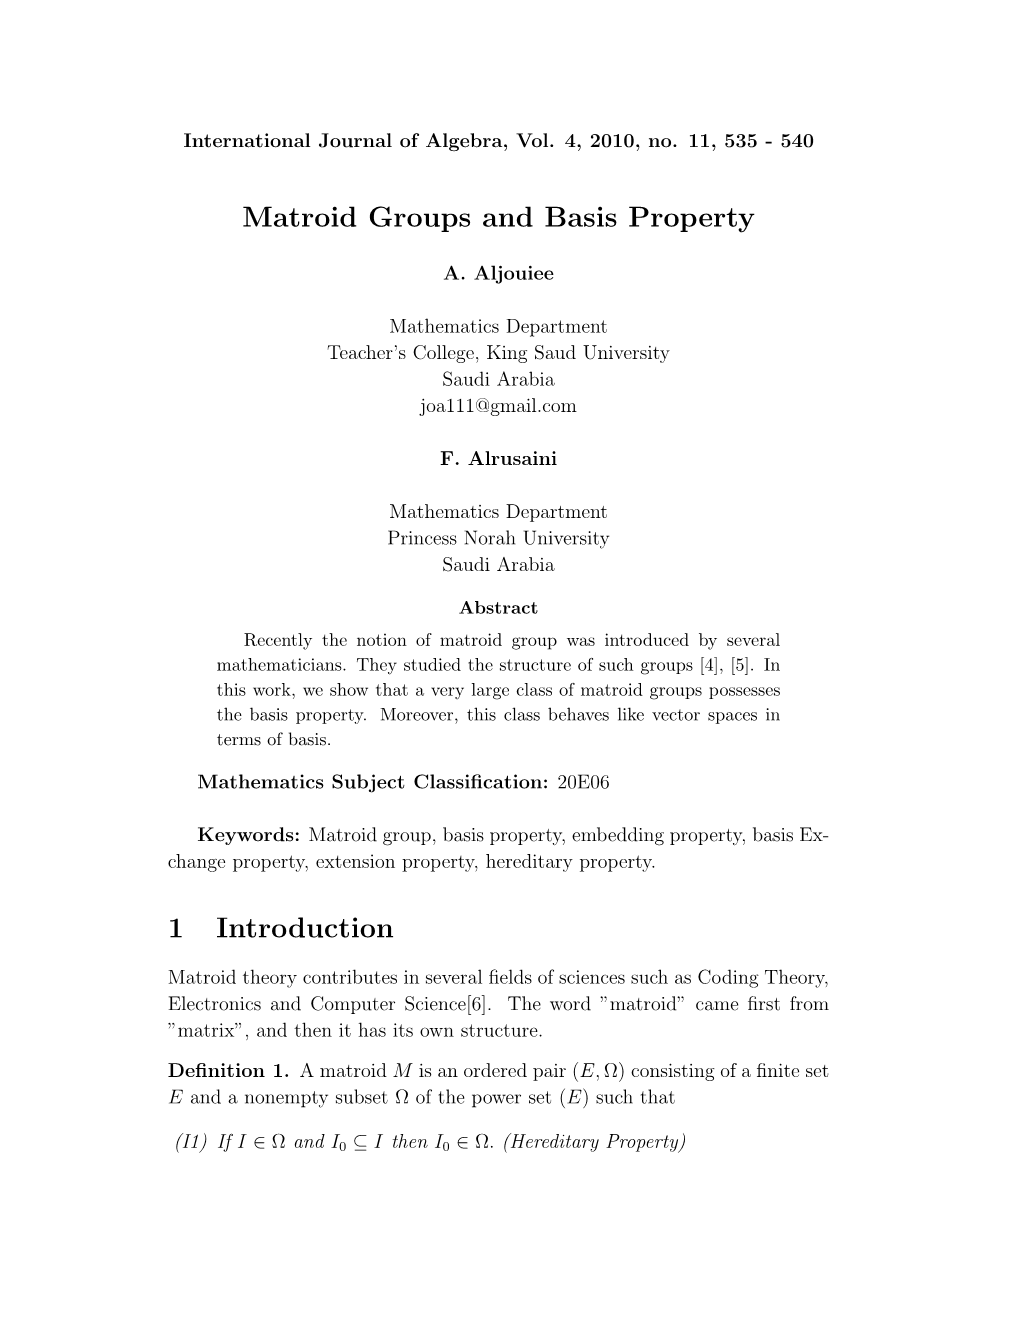 Matroid Groups and Basis Property